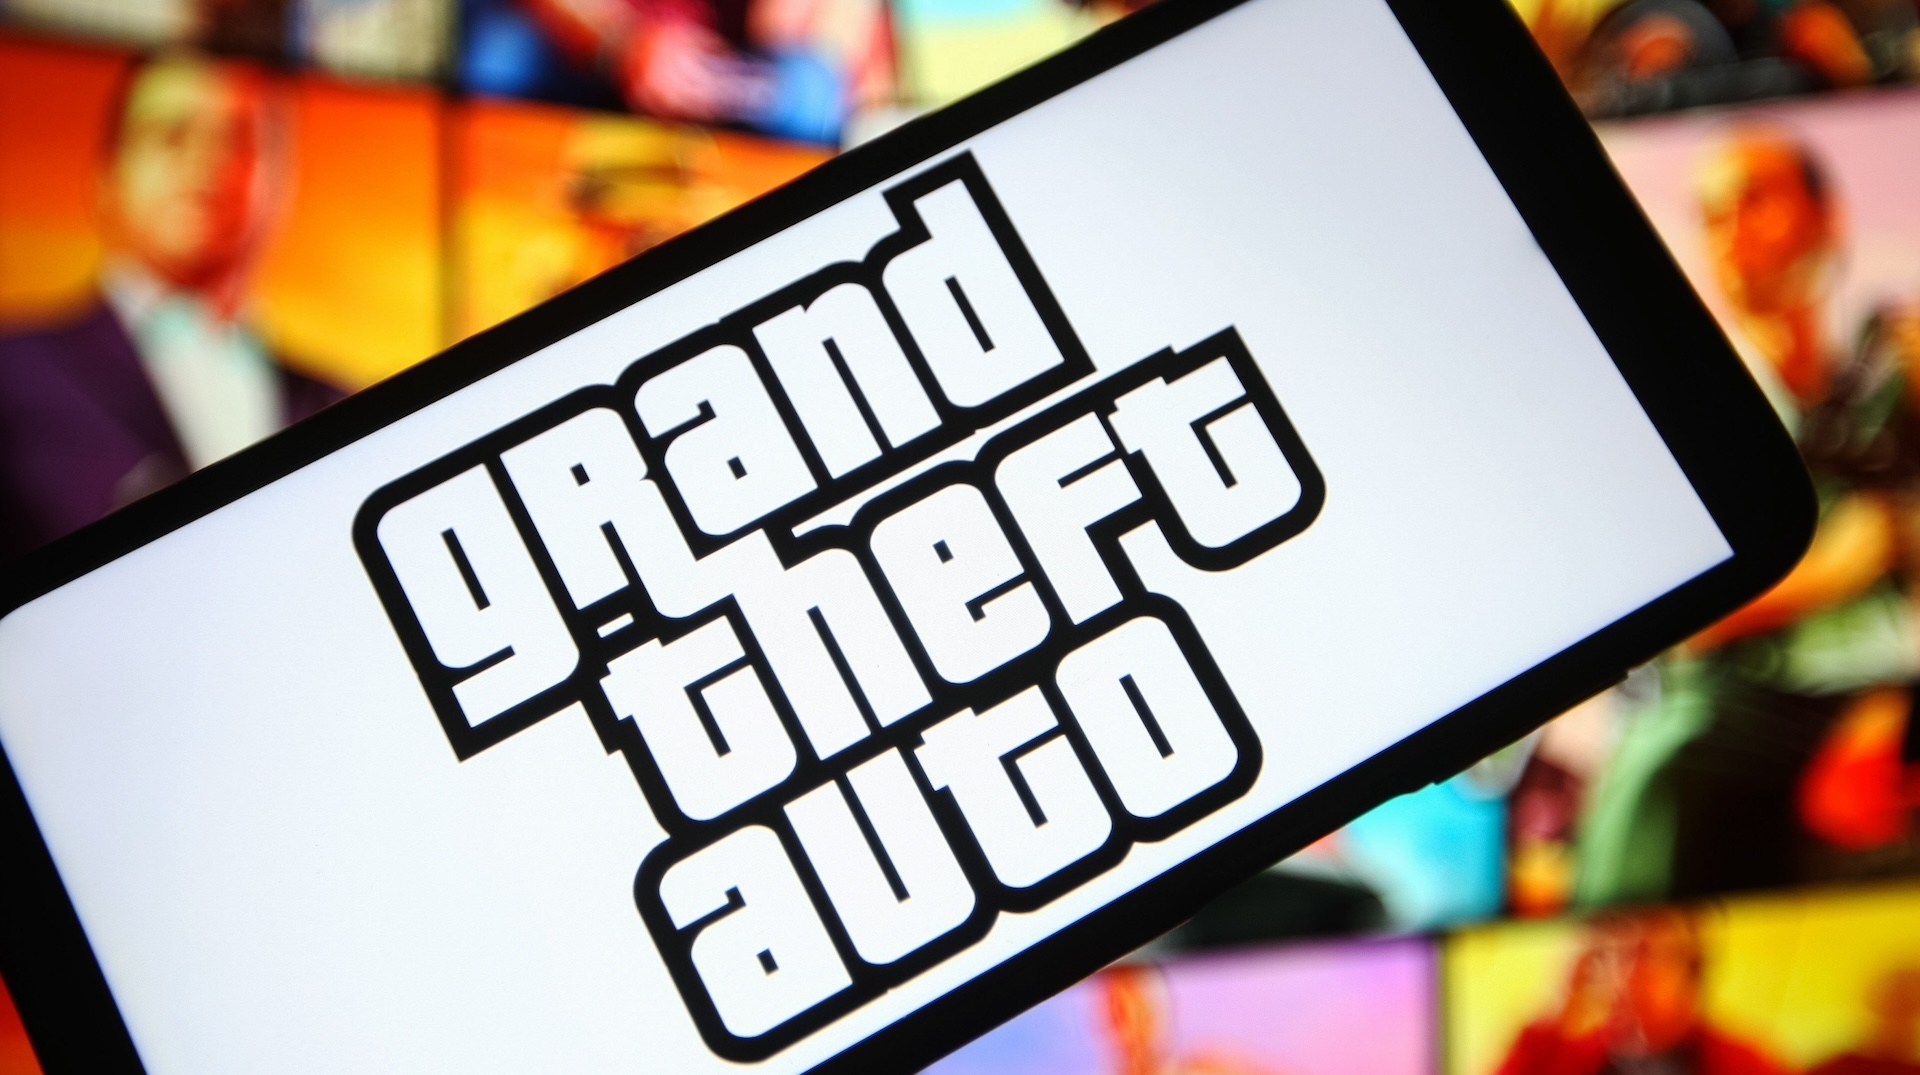 gta san andreas apk - Prices and Promotions - Dec 2023